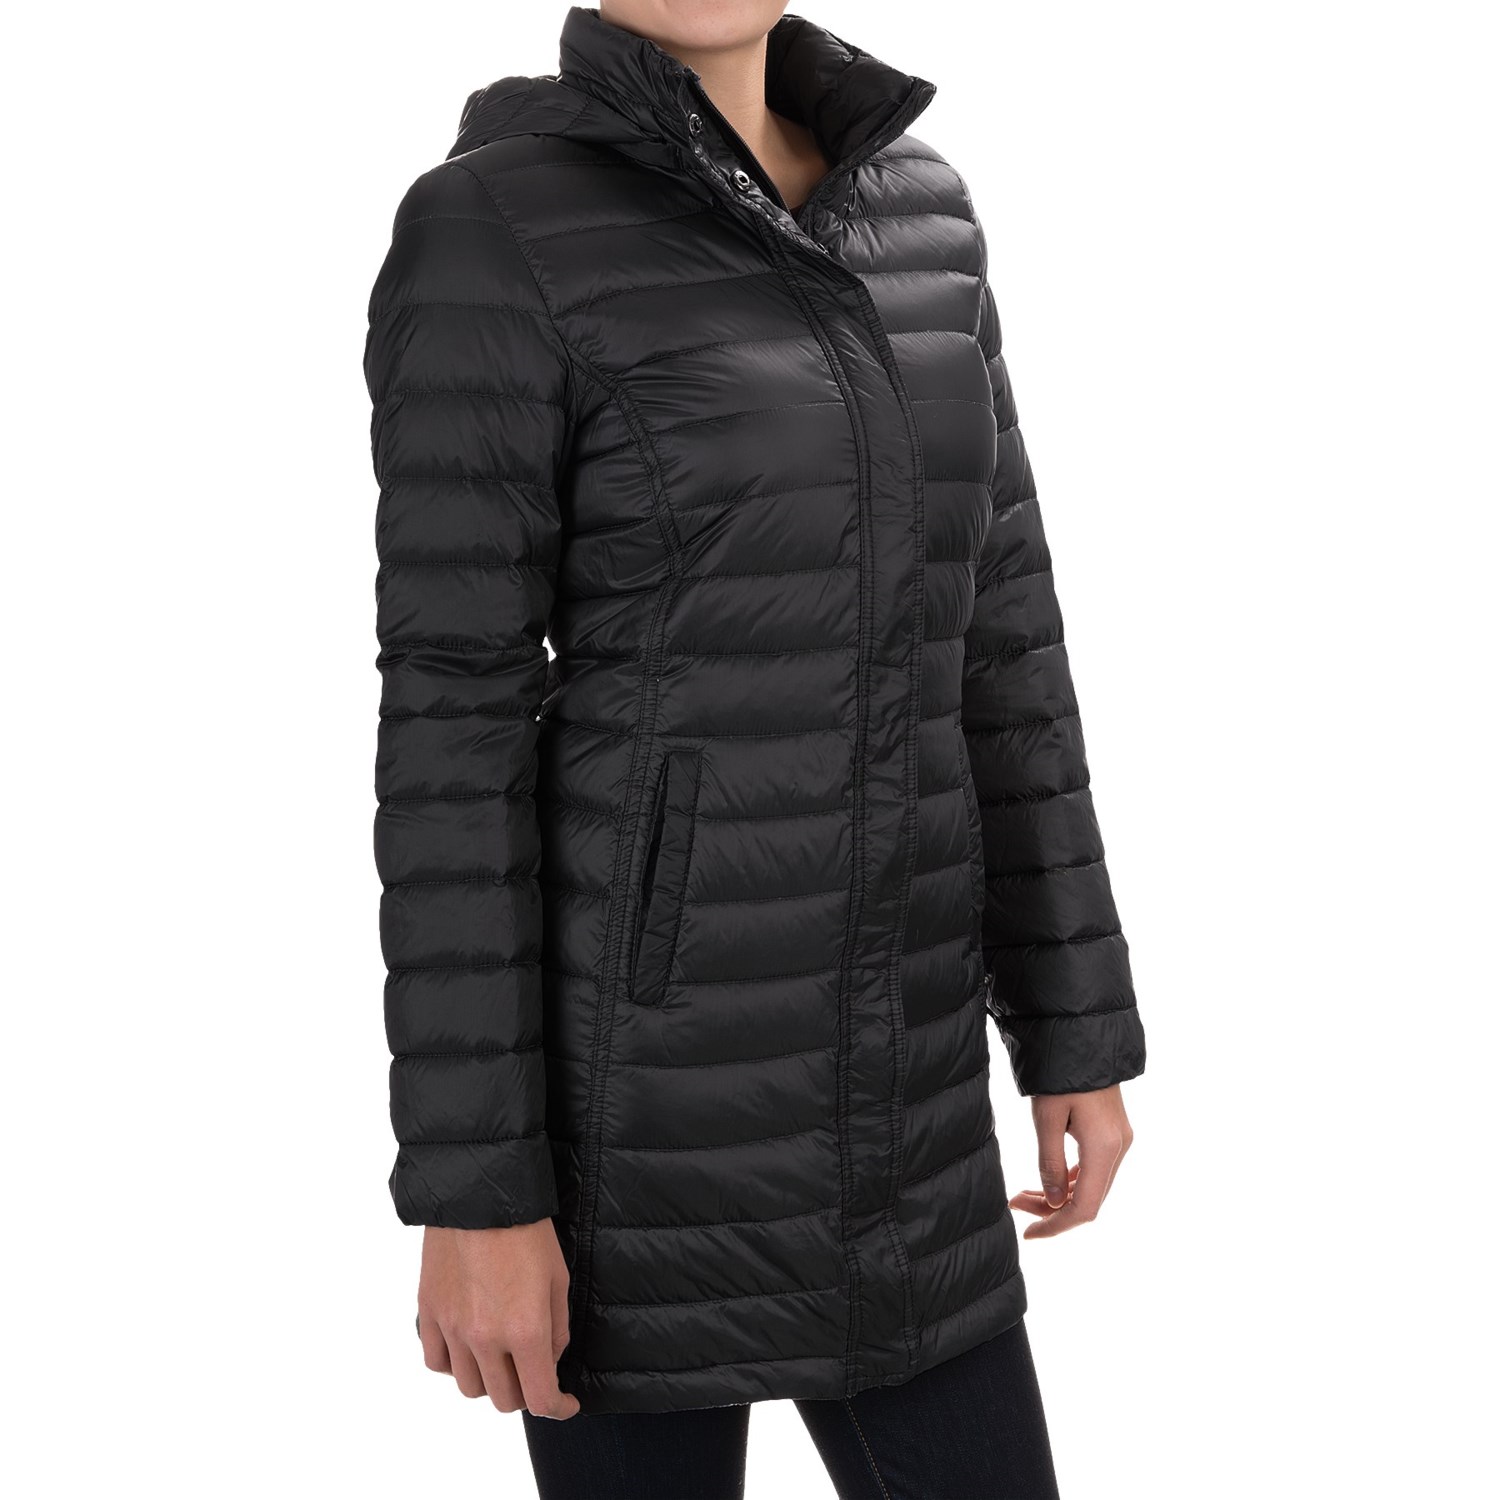 32 Degrees Packable Long Down Jacket (For Women) - Save 60%